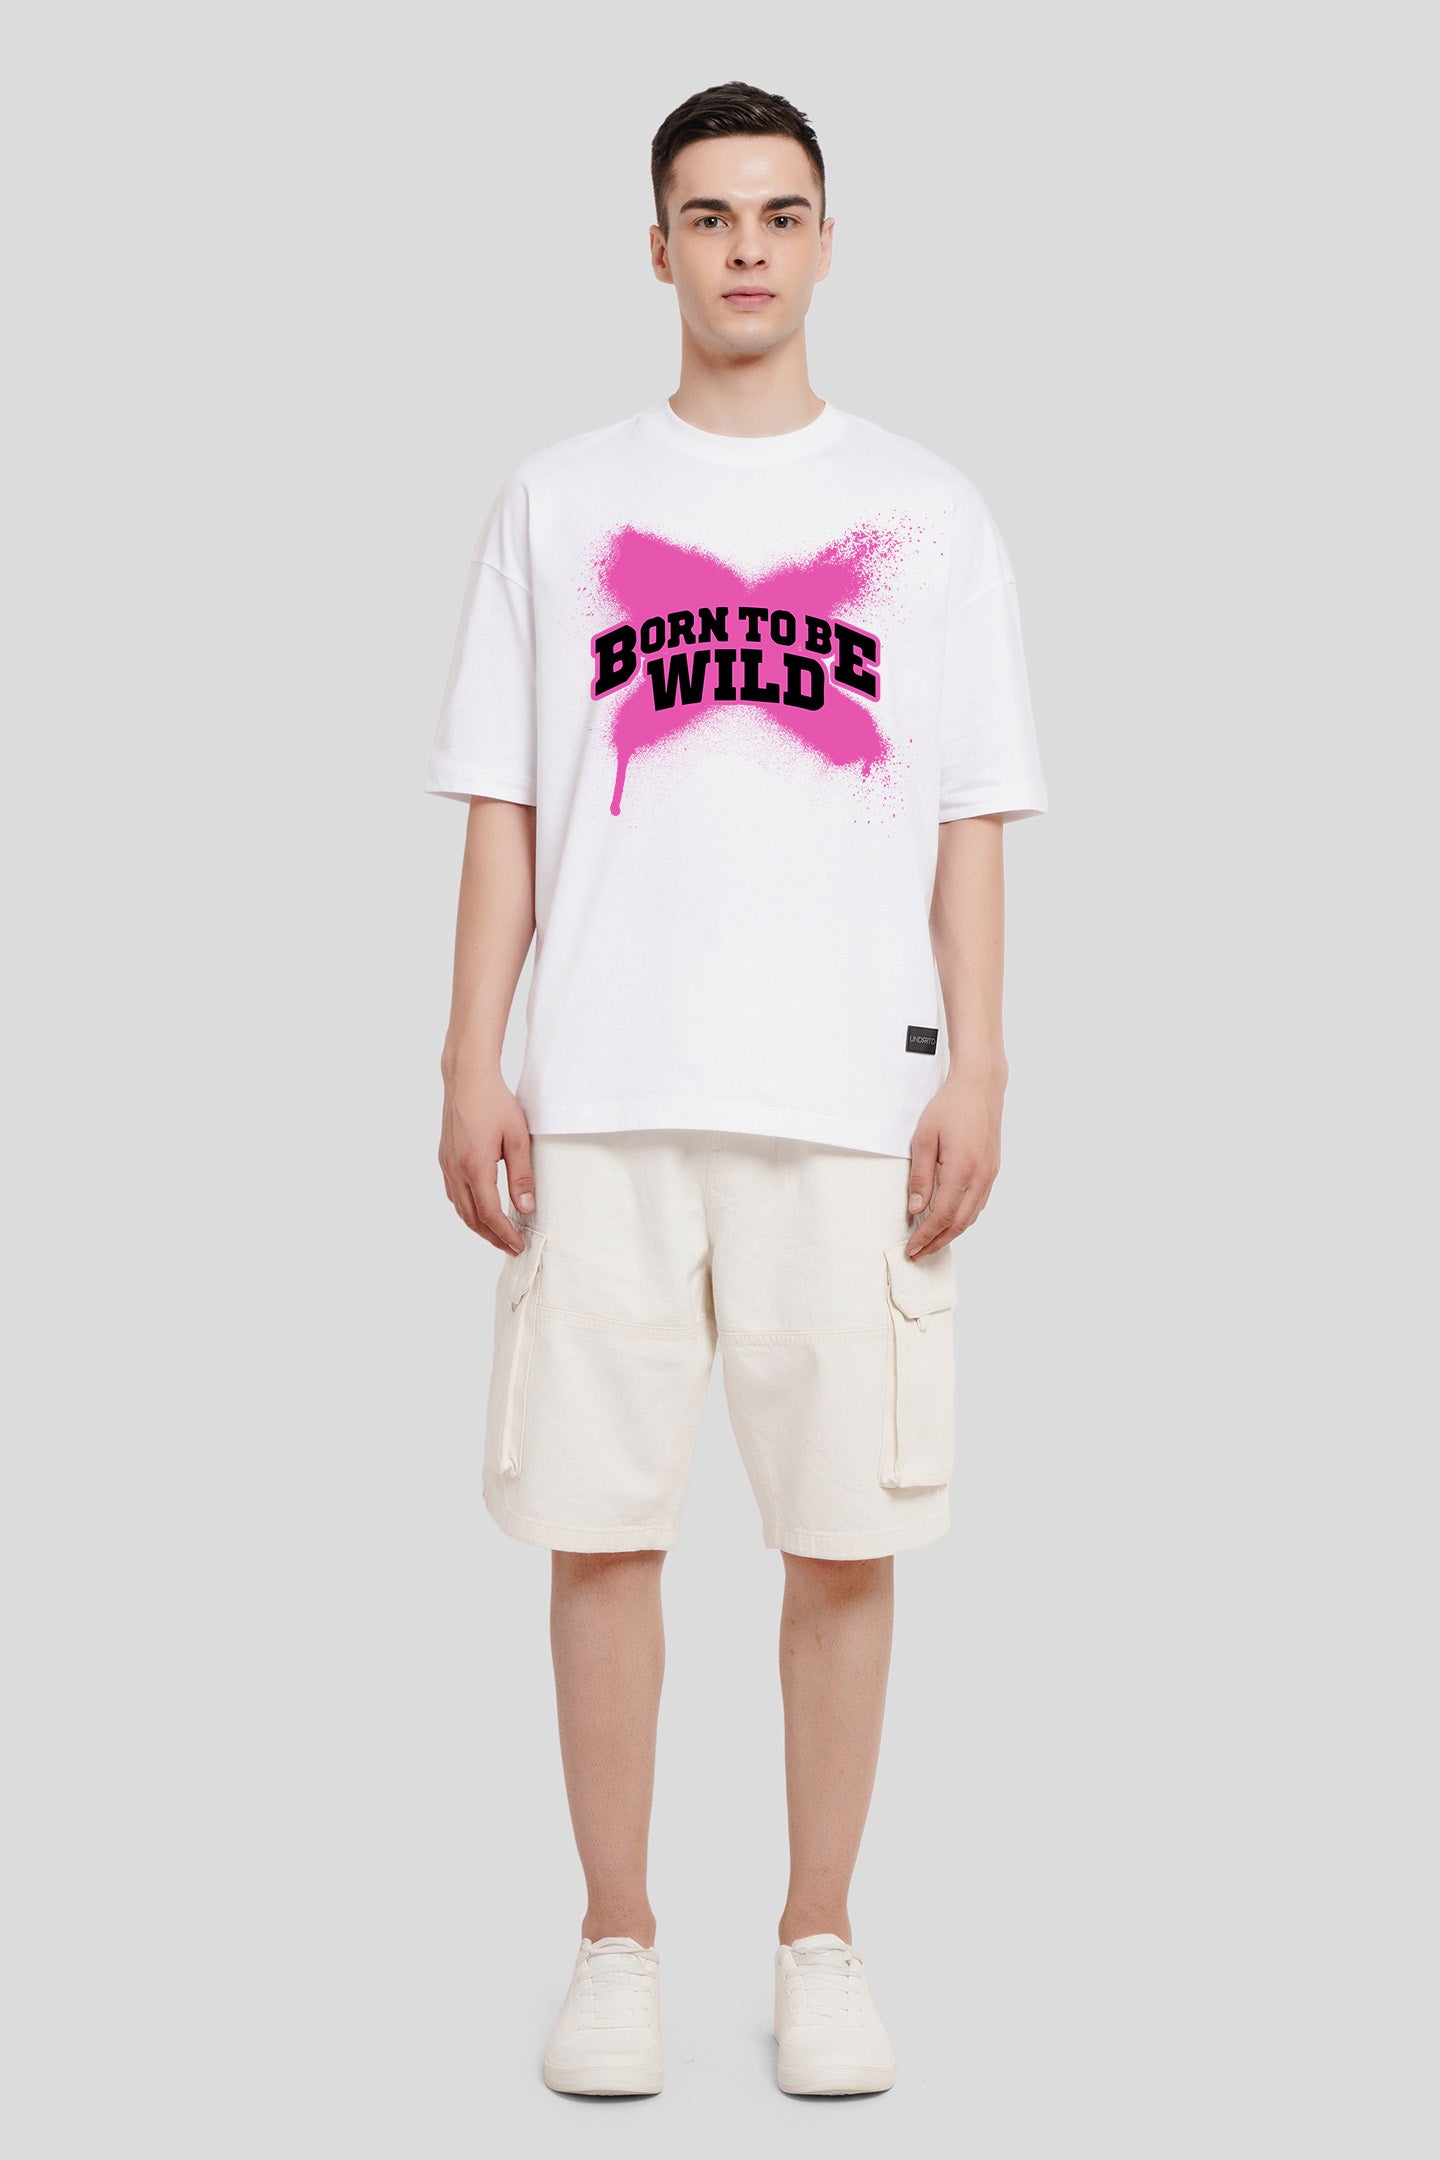 Born To Be Wild White Baggy Fit T-Shirt Men Pic 4